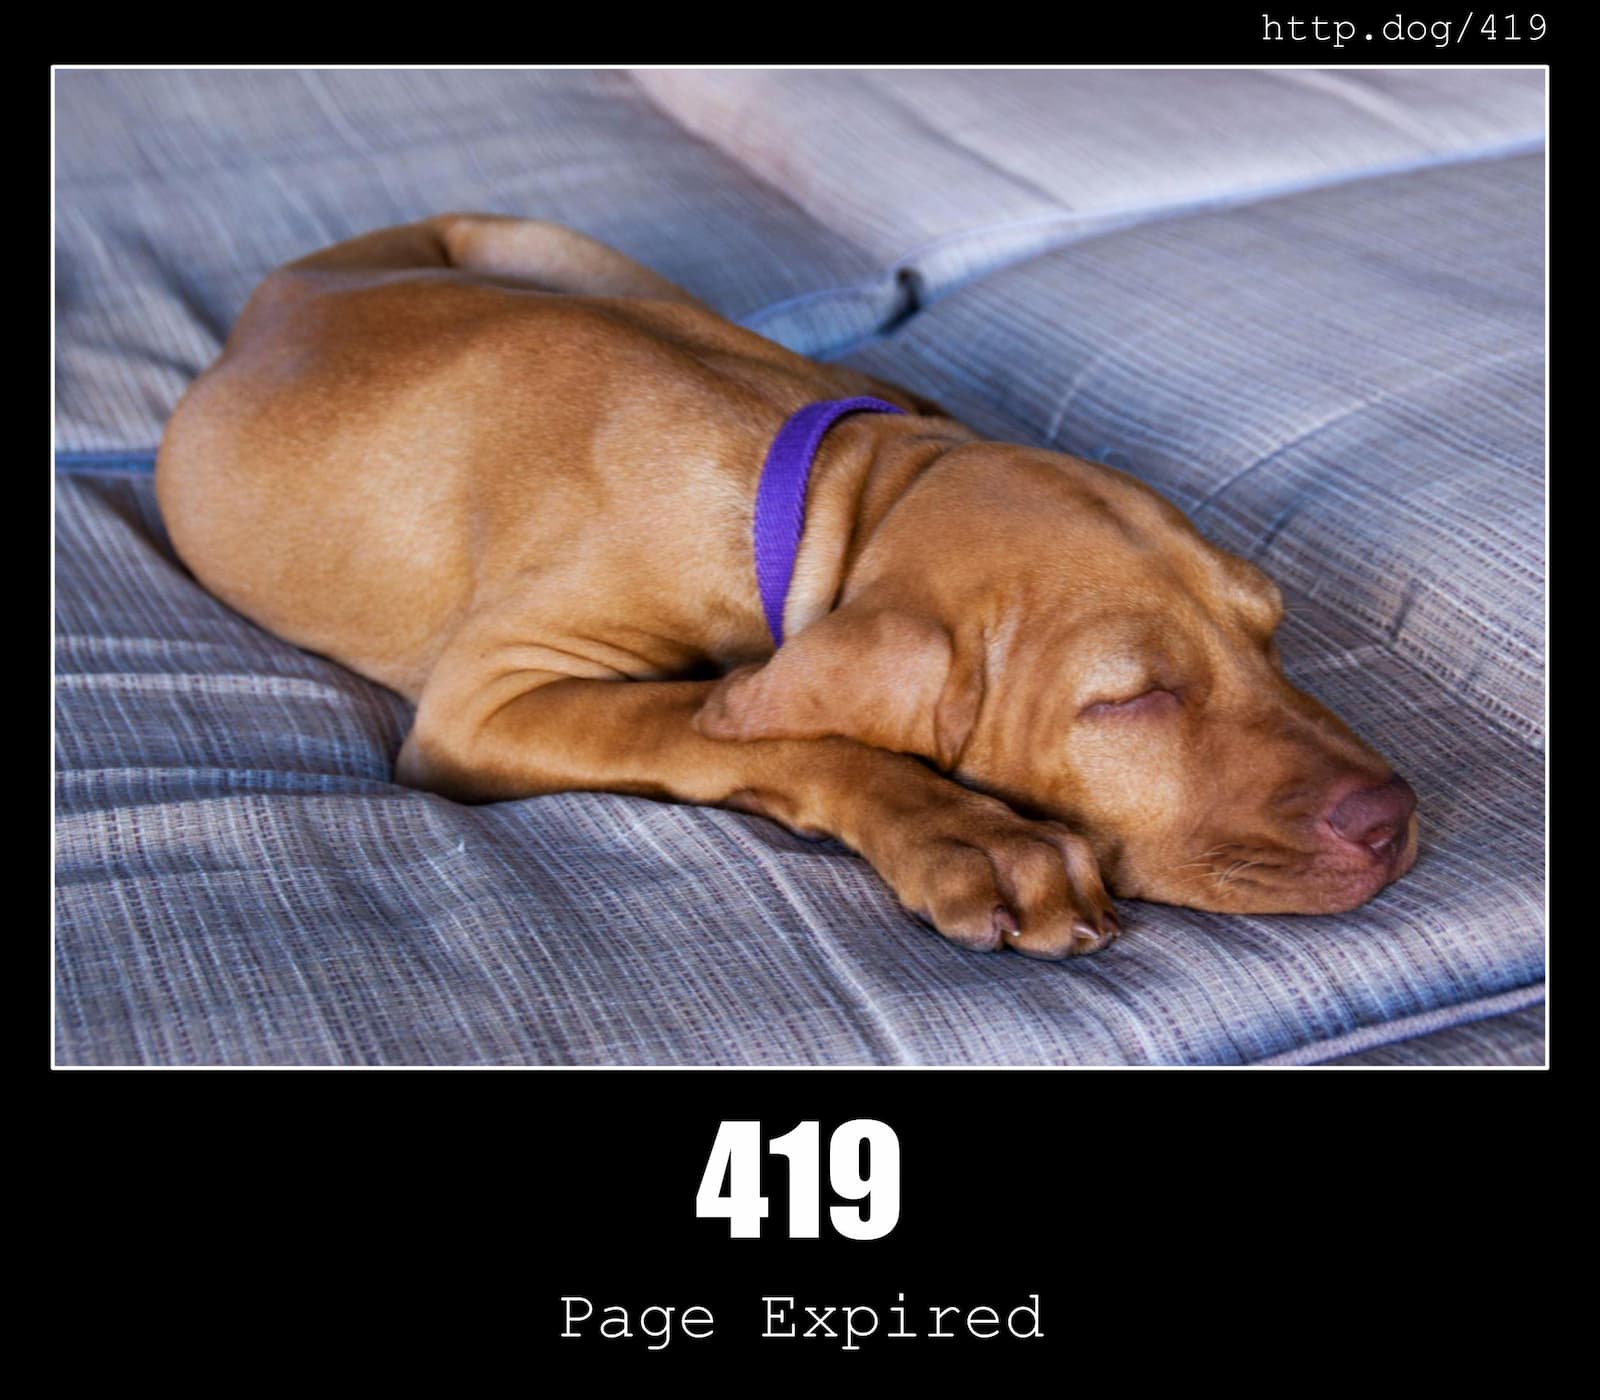 HTTP Status Code 419 Page Expired & Dogs